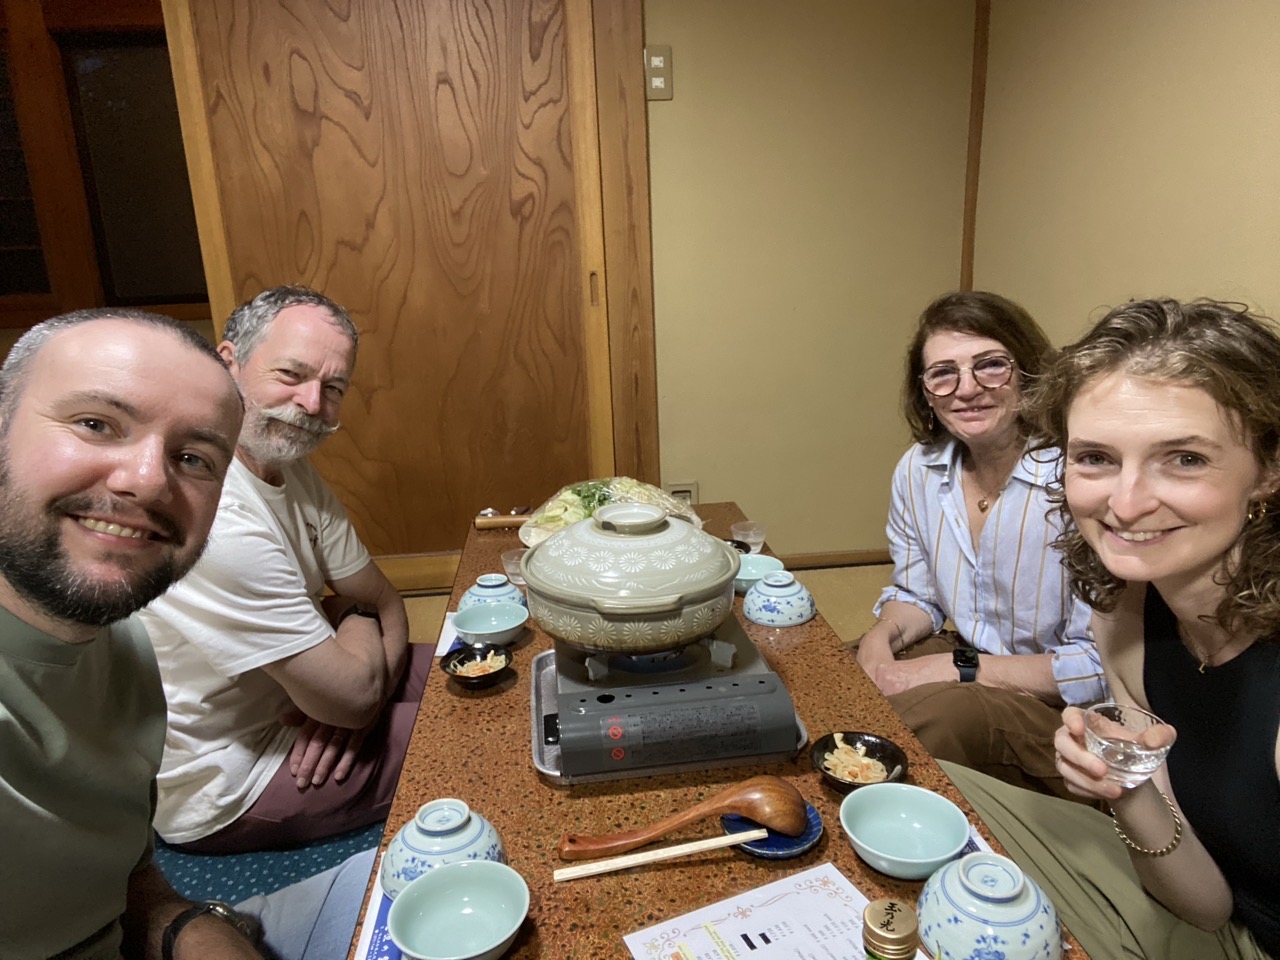 Myself, Lucy and her parents sitting round a low table having dinner which is the hot pot in the middle